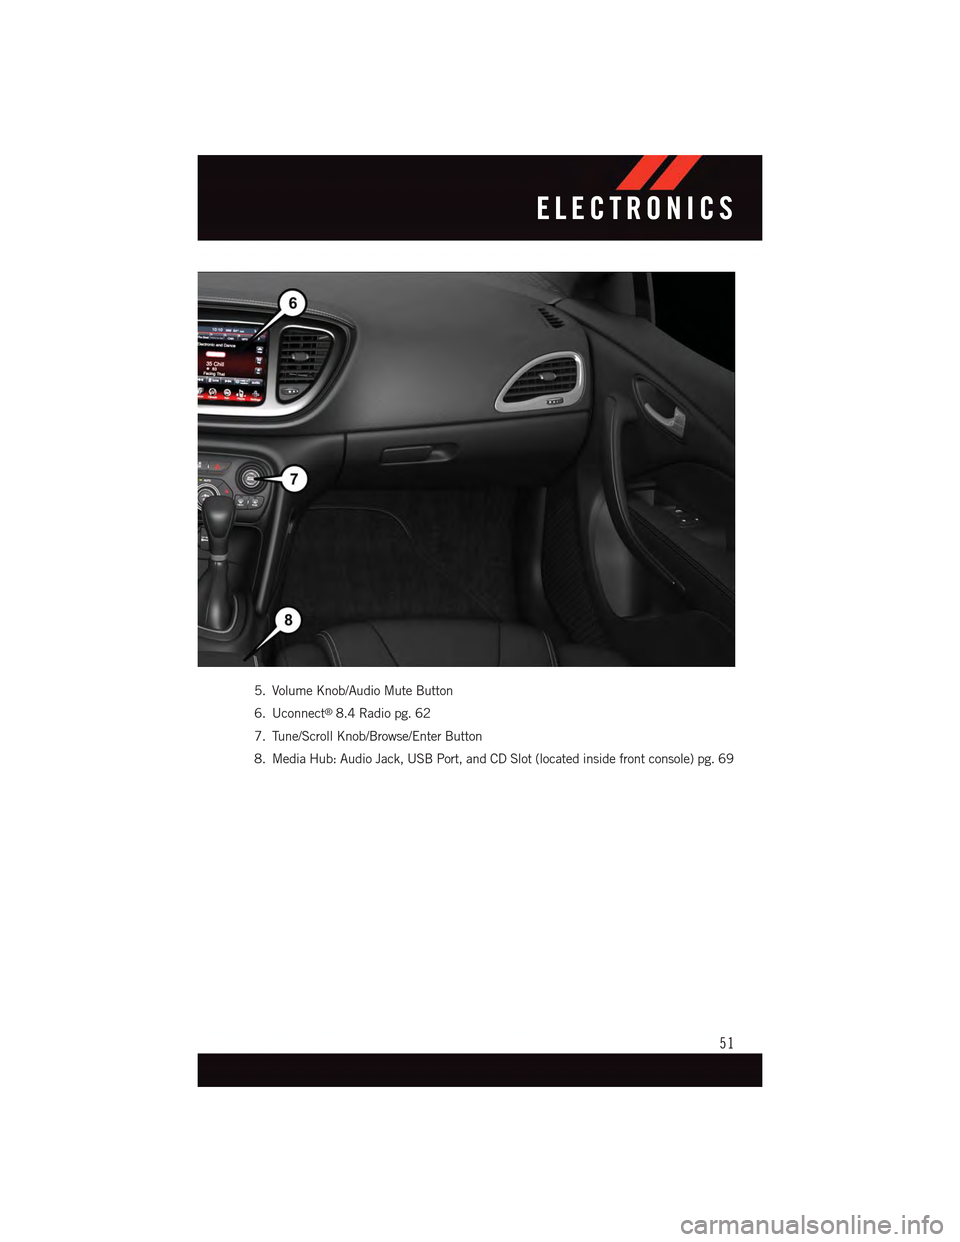 DODGE DART 2015 PF / 1.G User Guide 5. Volume Knob/Audio Mute Button
6. Uconnect®8.4 Radio pg. 62
7. Tune/Scroll Knob/Browse/Enter Button
8. Media Hub: Audio Jack, USB Port, and CD Slot (located inside front console) pg. 69
ELECTRONICS